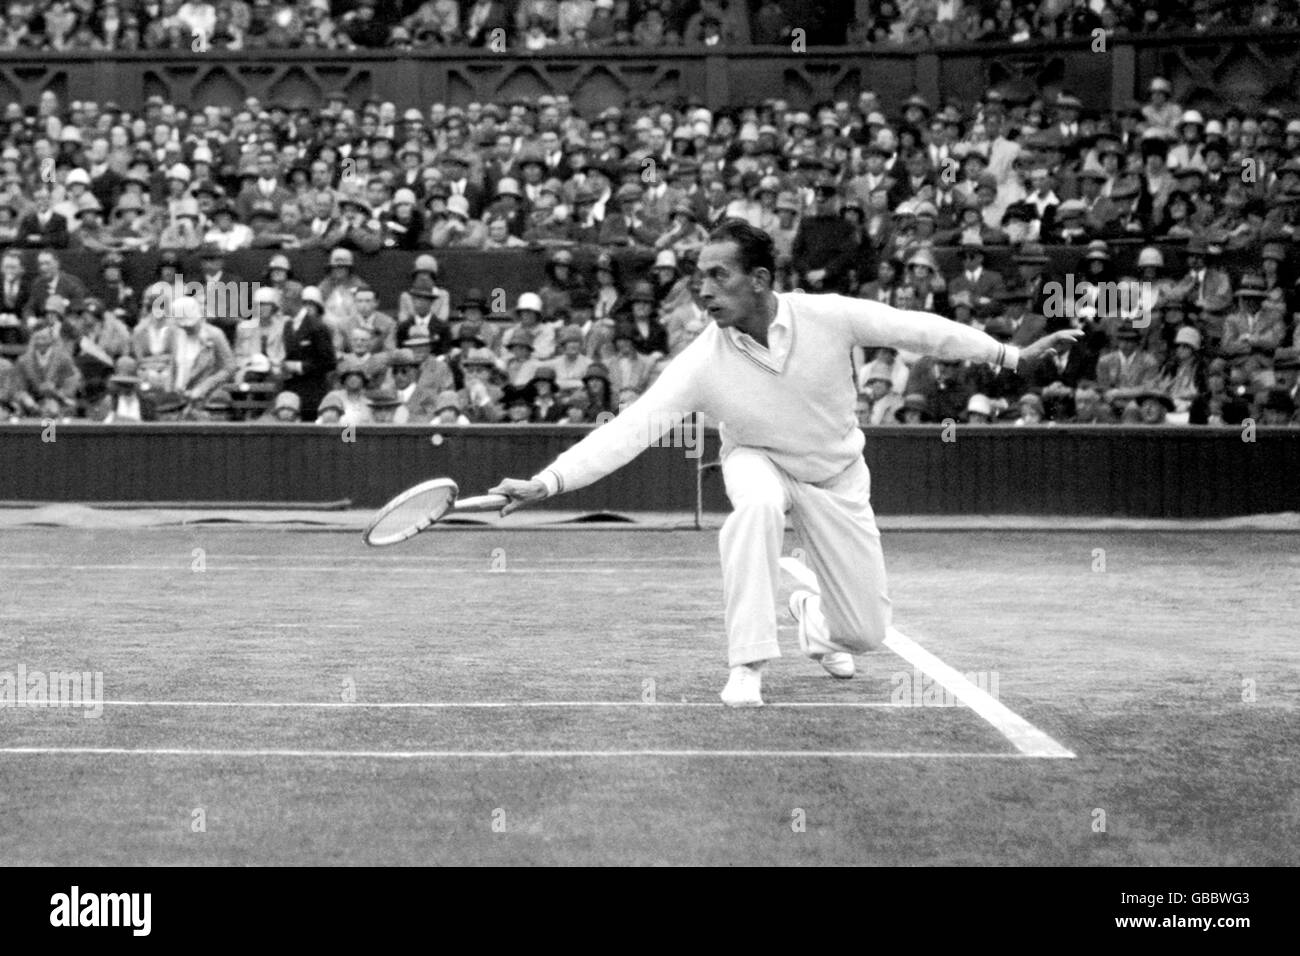 Rene Lacoste High Resolution Stock Photography and Images - Alamy